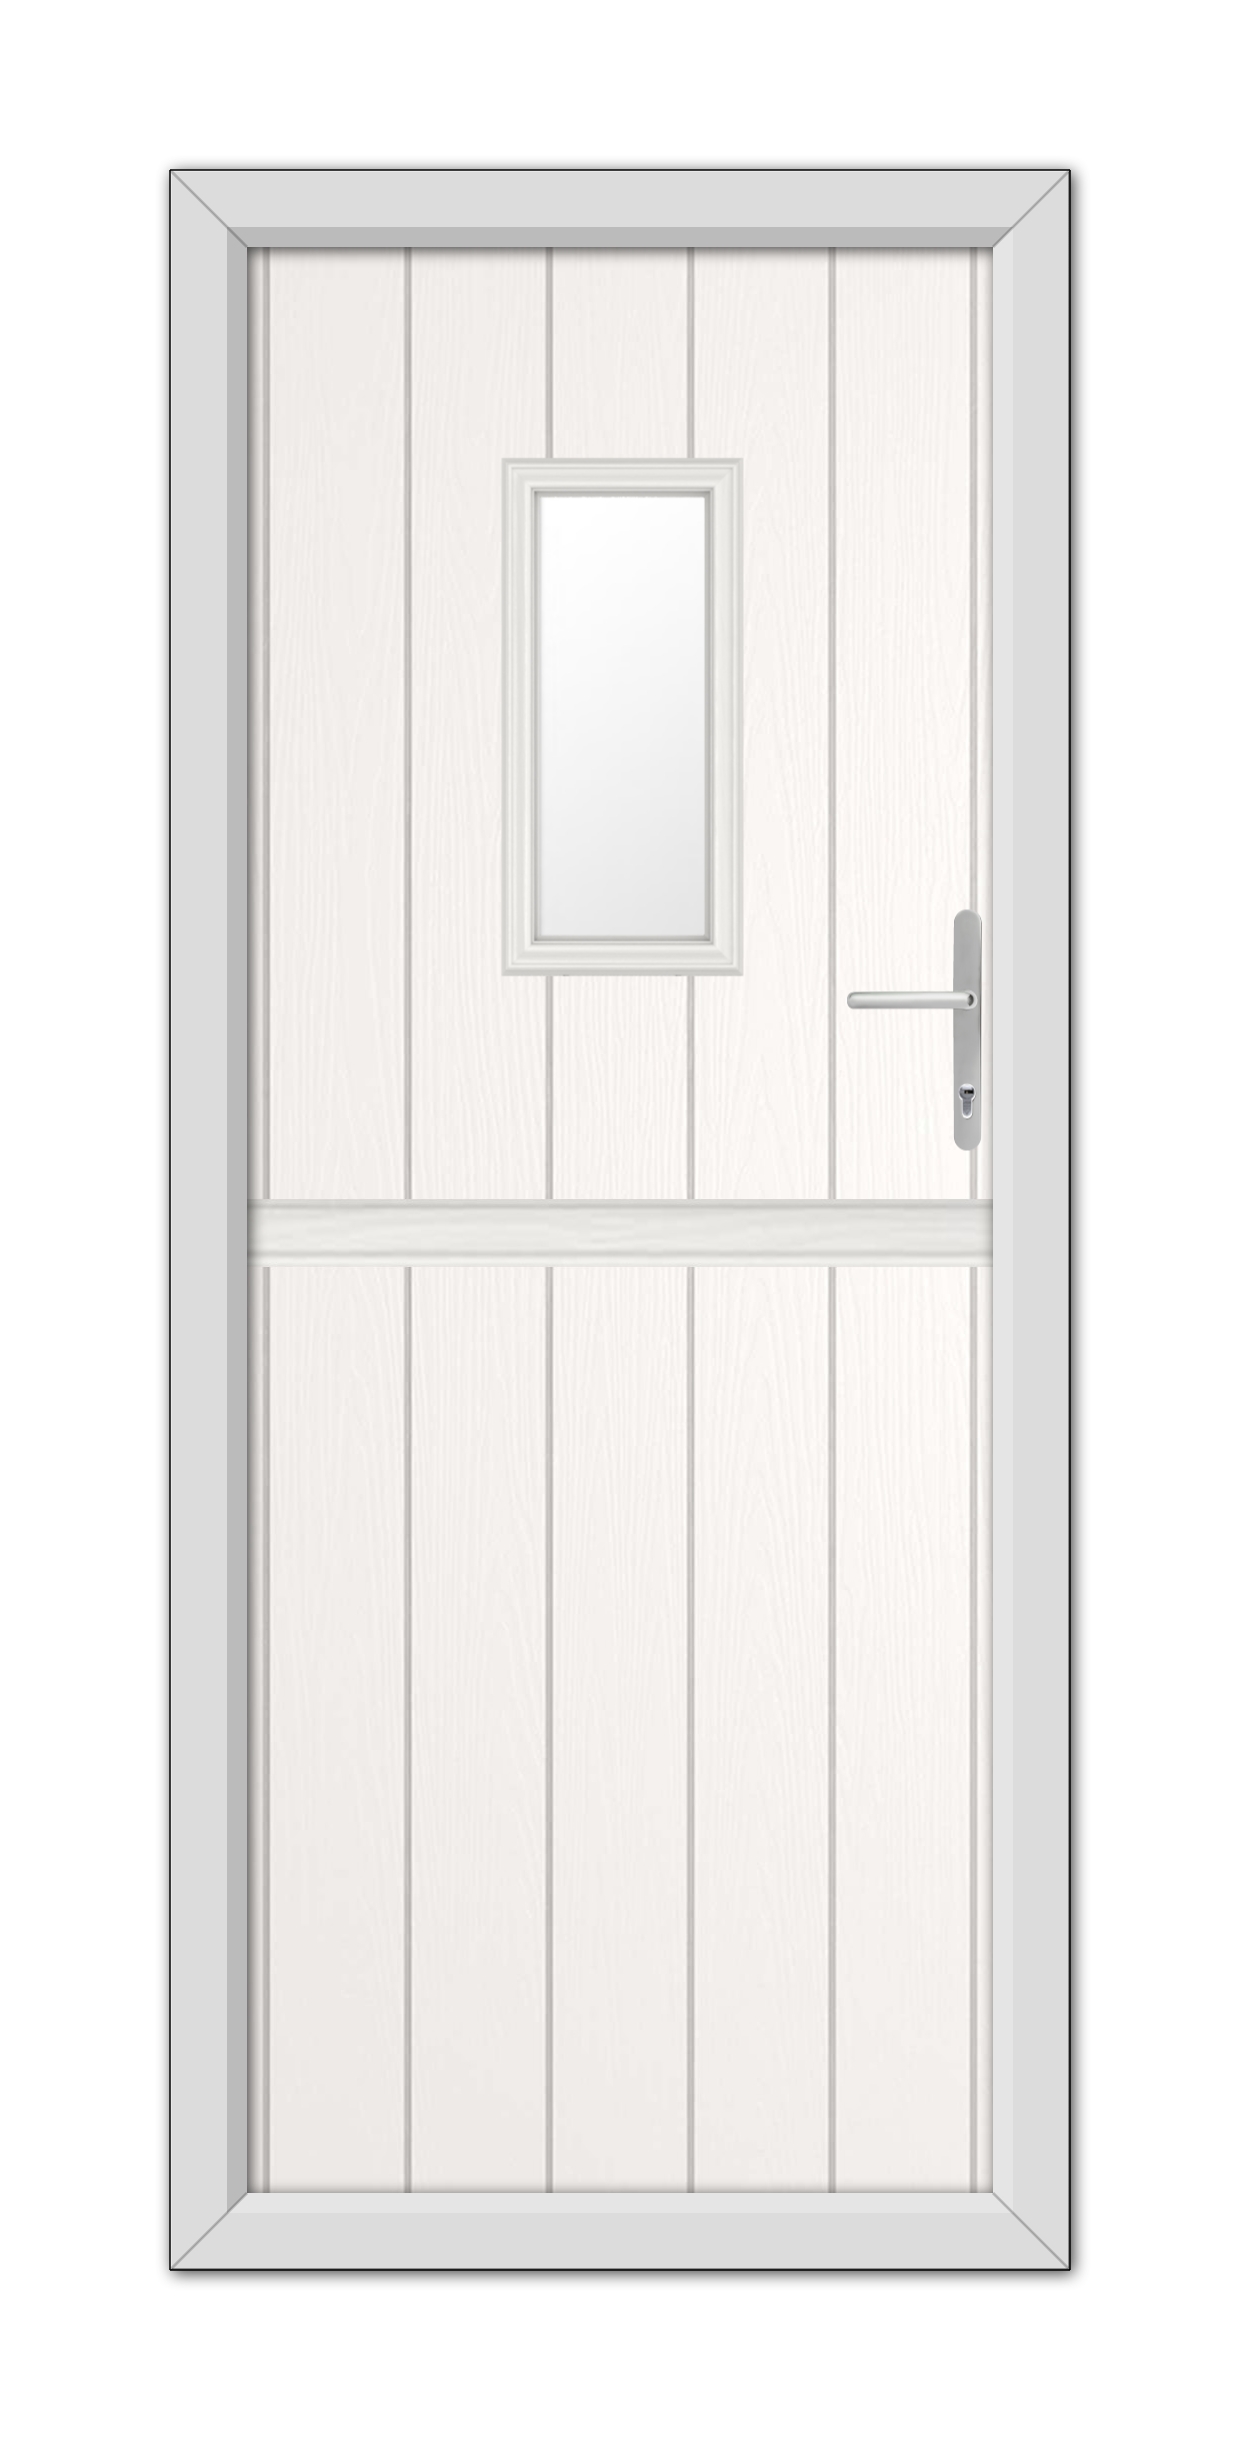 A modern White Somerset Stable Composite Door 48mm Timber Core with a rectangular glass panel at the top, a square frosted window in the center, and a metal handle, set within a white frame.